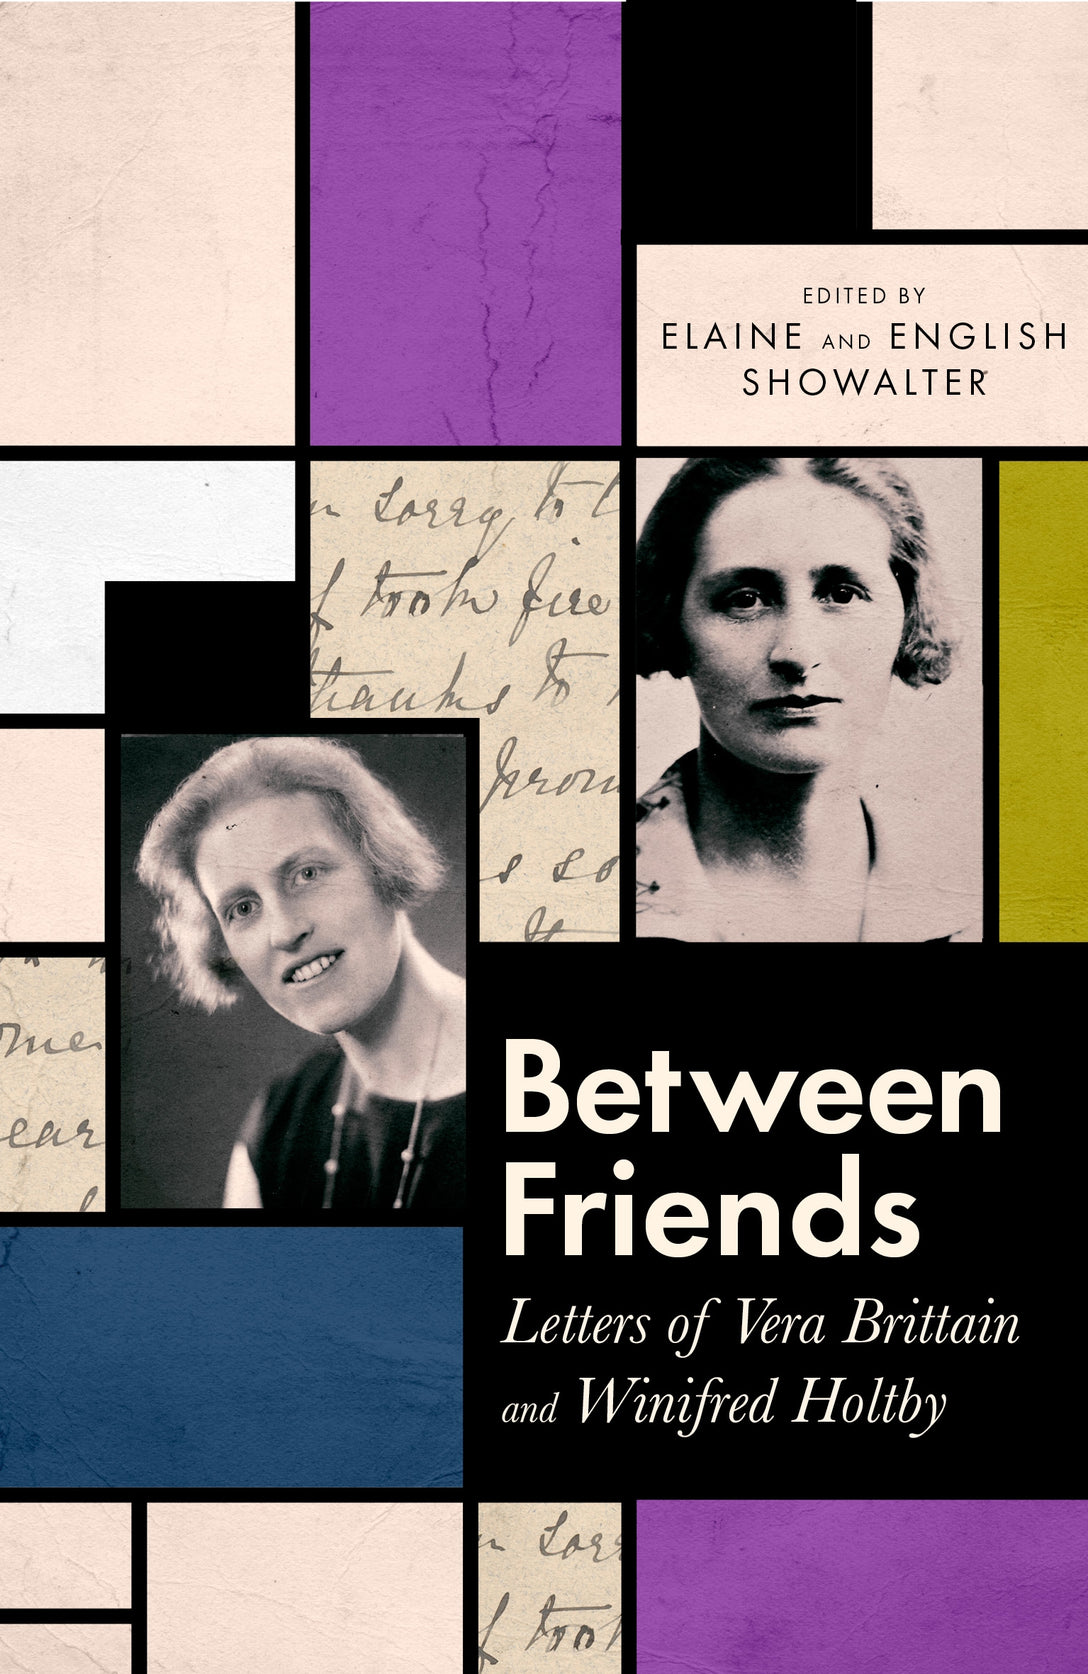 Between Friends by Elaine Showalter, English Showalter